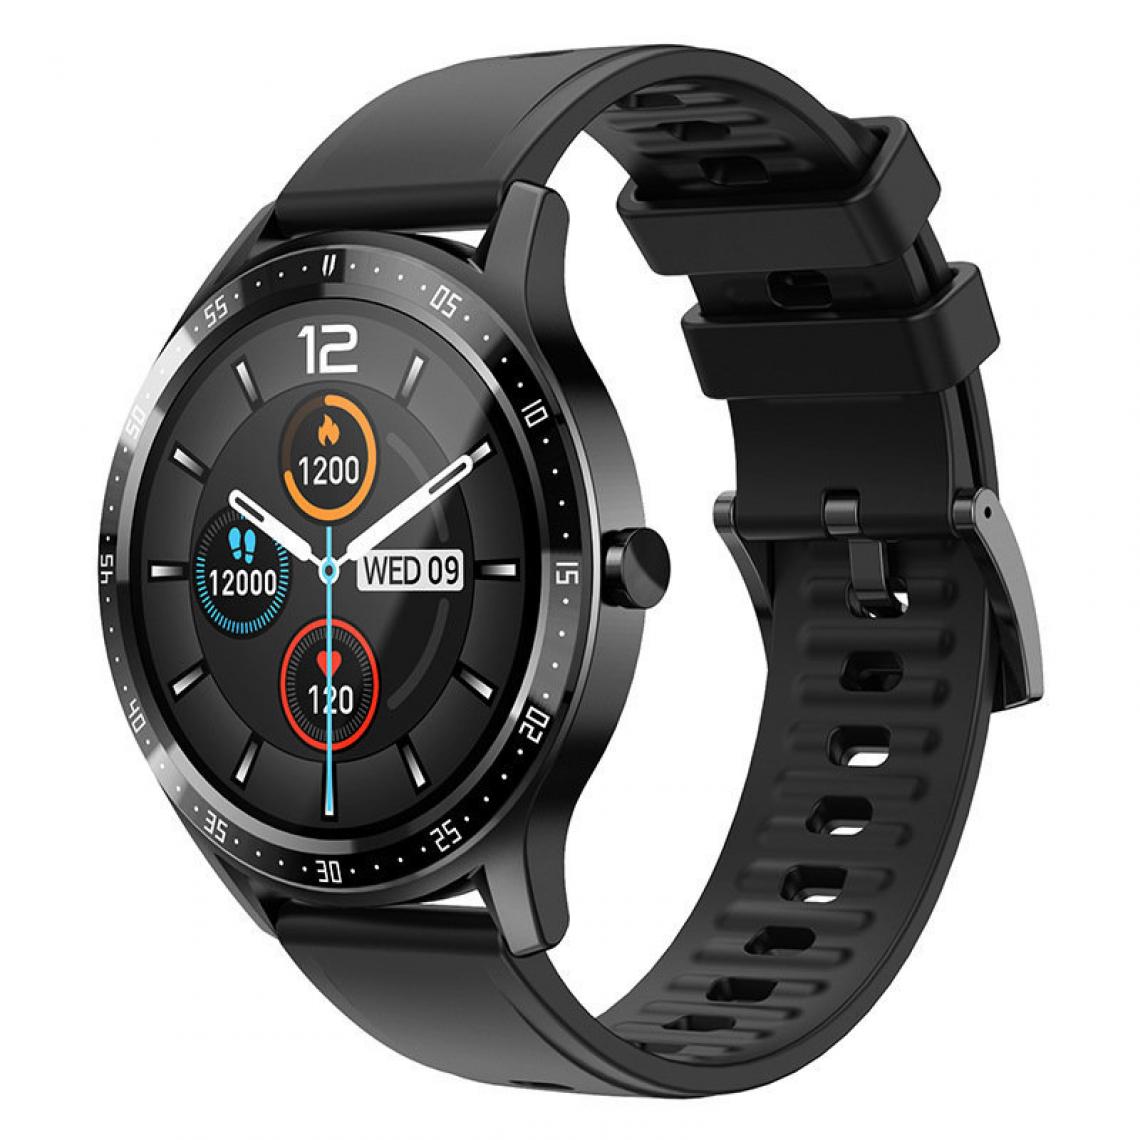 Chronotech Montres - Chronus Smart Watch for Men Women, 1.28 inch Touch Fitness Tracker with Heart Rate Monitor, Blood Pressure, Notification, IP67 Waterproof Fitness Watch with 8 Mode Sports, Round Smartwatch for Android iOS(black) - Montre connectée